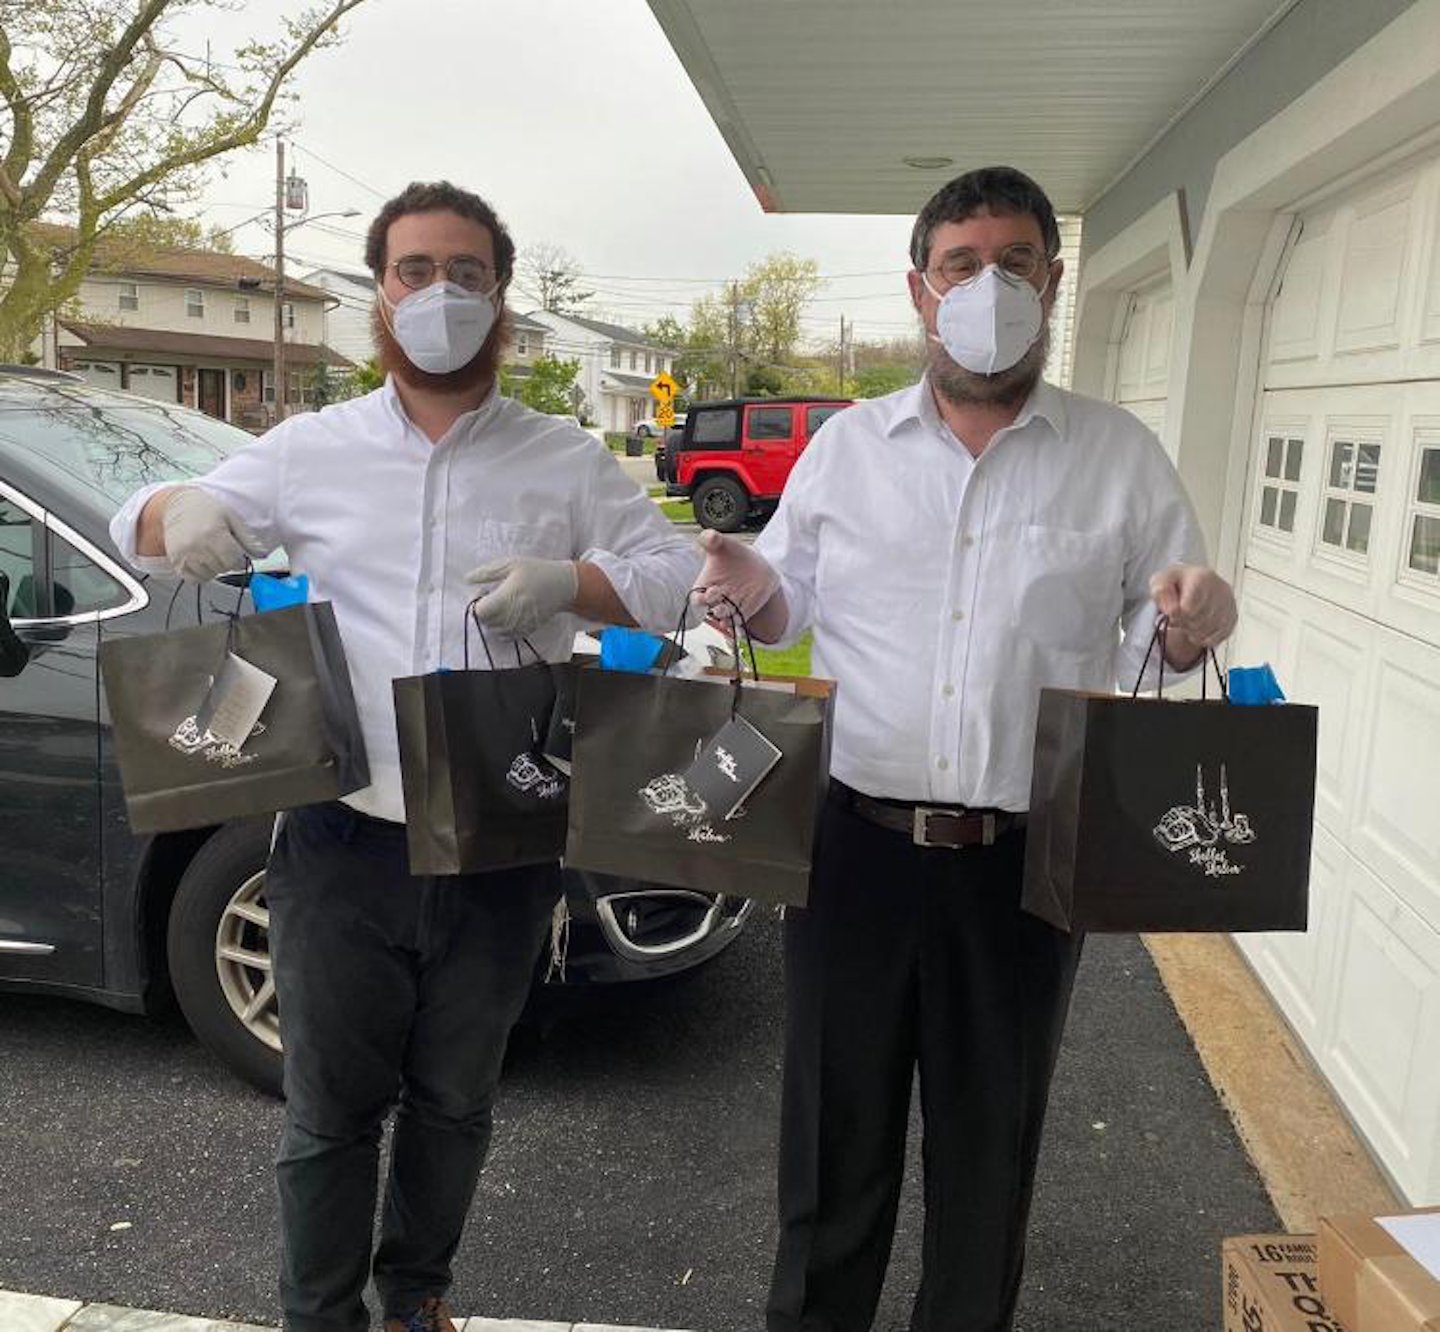 Gurkov, right, and his son-in-law, Zev Bumgarten, affectionately known as Rabbi Zev, delivered care packages to residents after the pandemic struck.